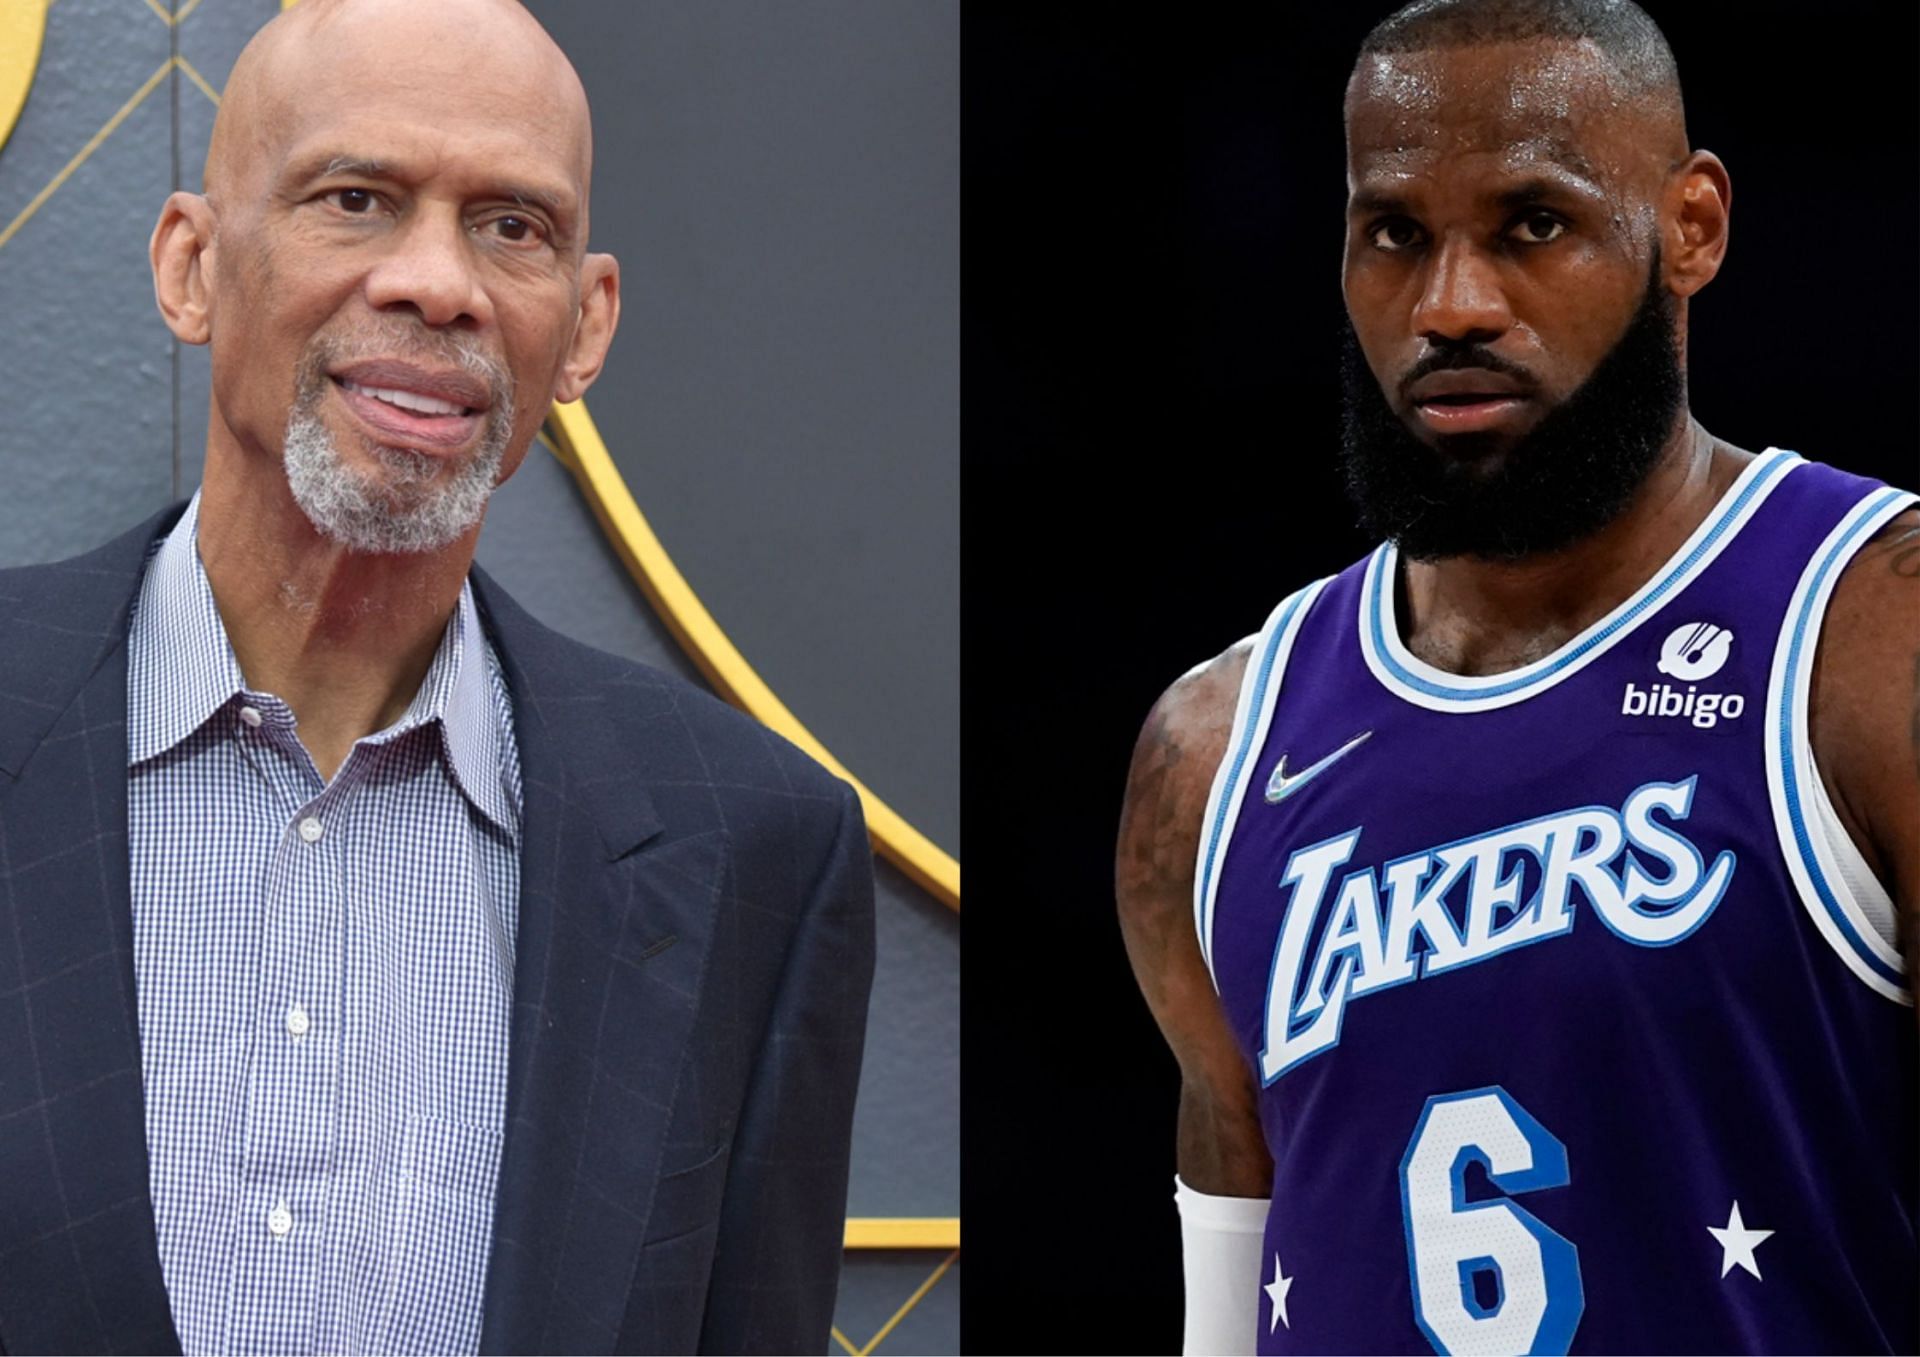 LeBron James is now 89 points away from capturing the all-time scoring record that Kareem Abdul-Jabbar has held for 38 years. [photo: LA Times]